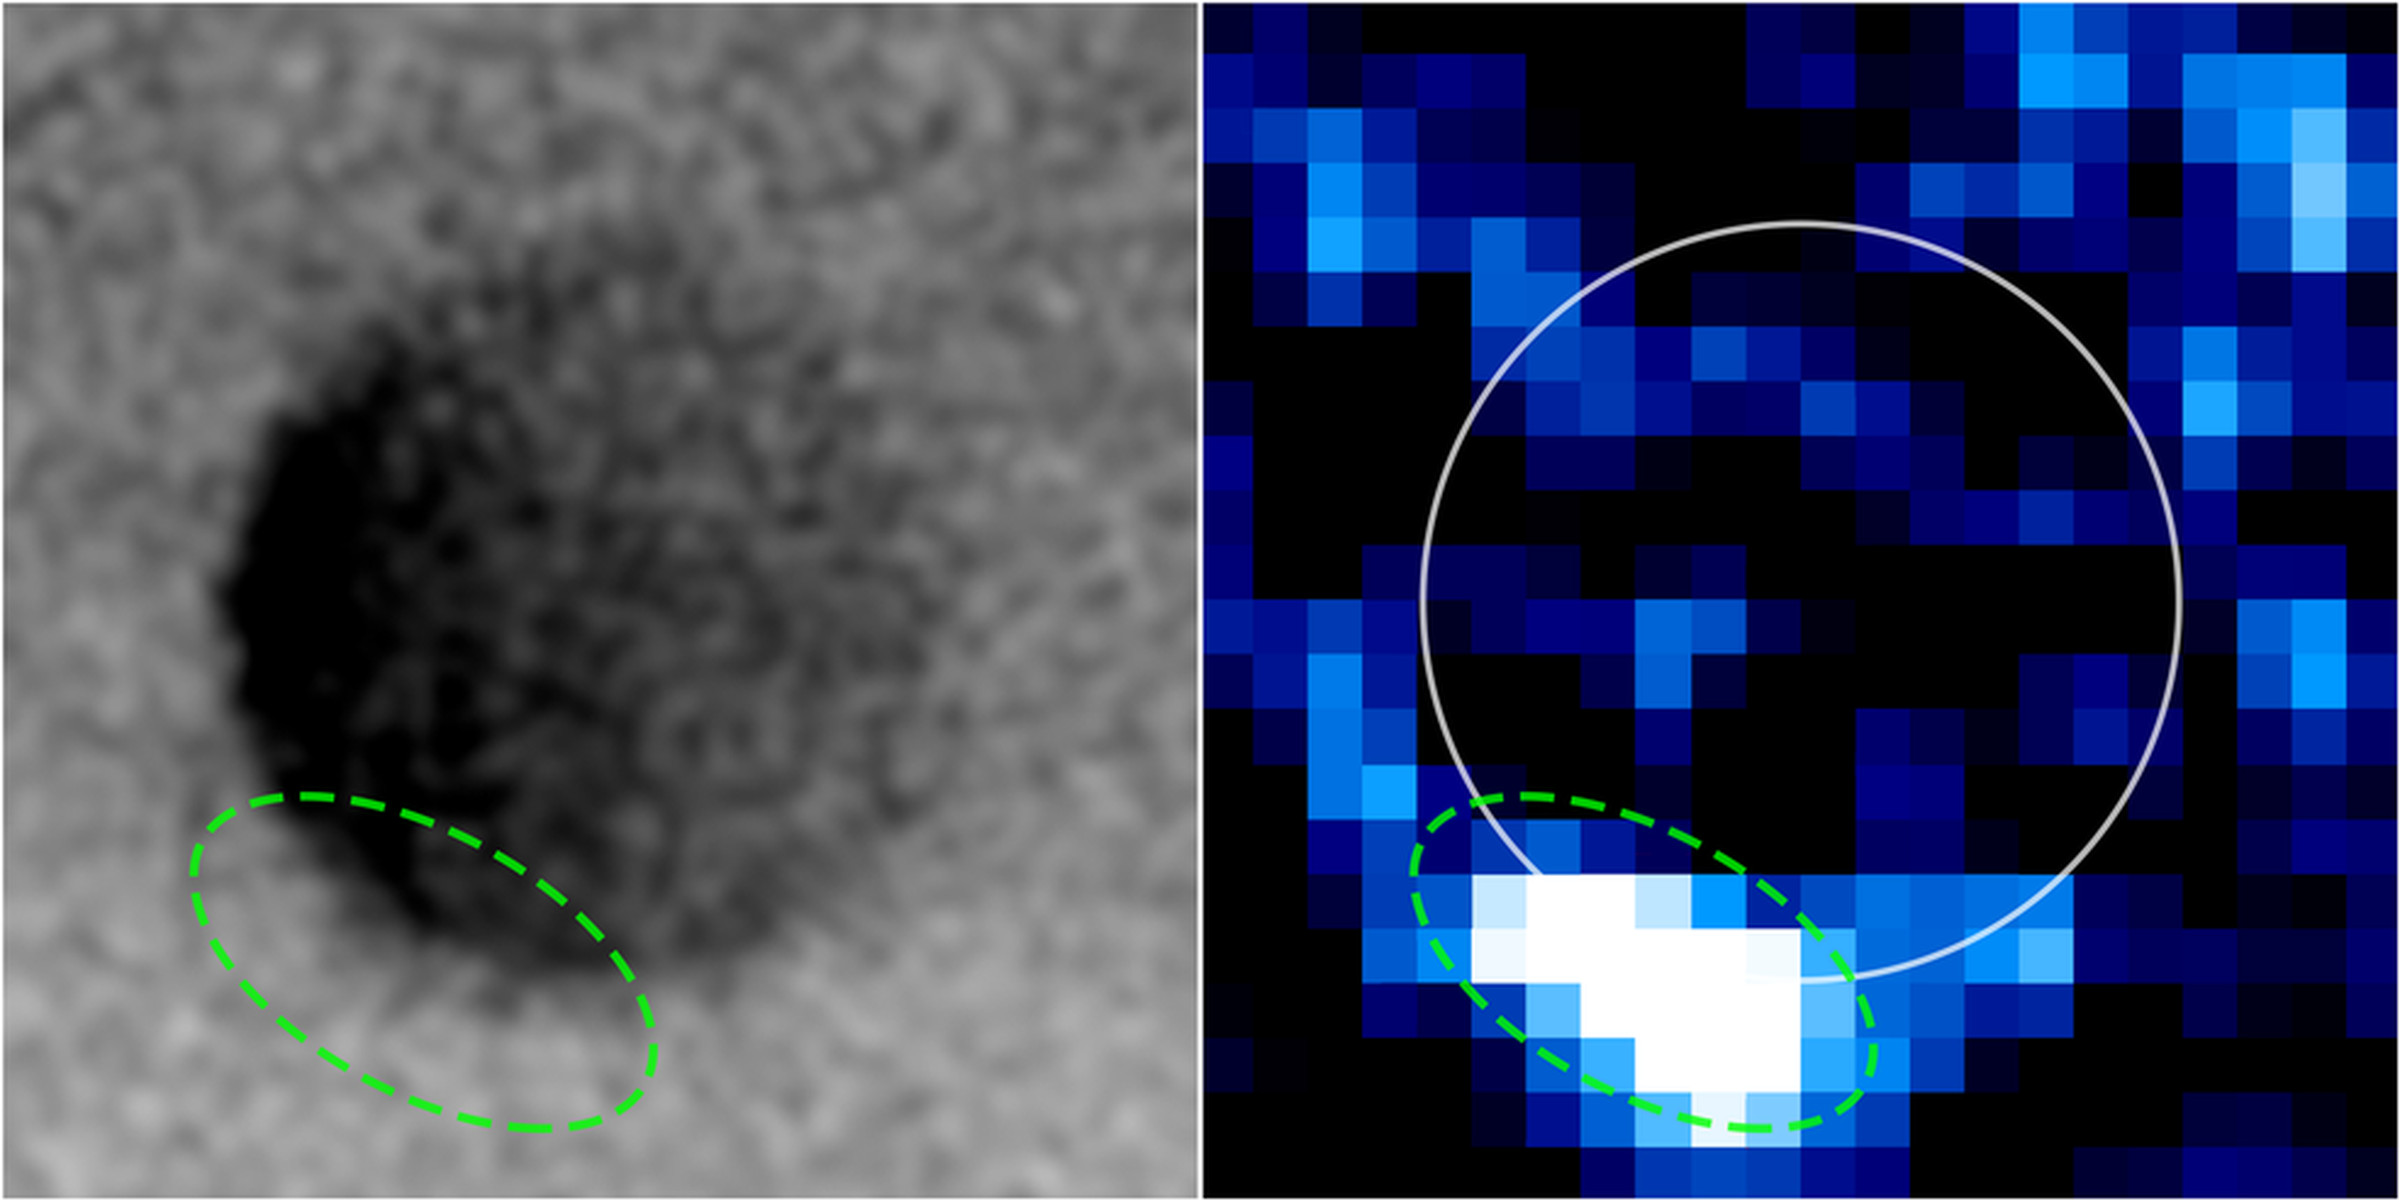 On the left is an image taken by Sparks’ team that shows what appears to be water plumes. On the right is a measurement of aurorae from the 2012 findings.